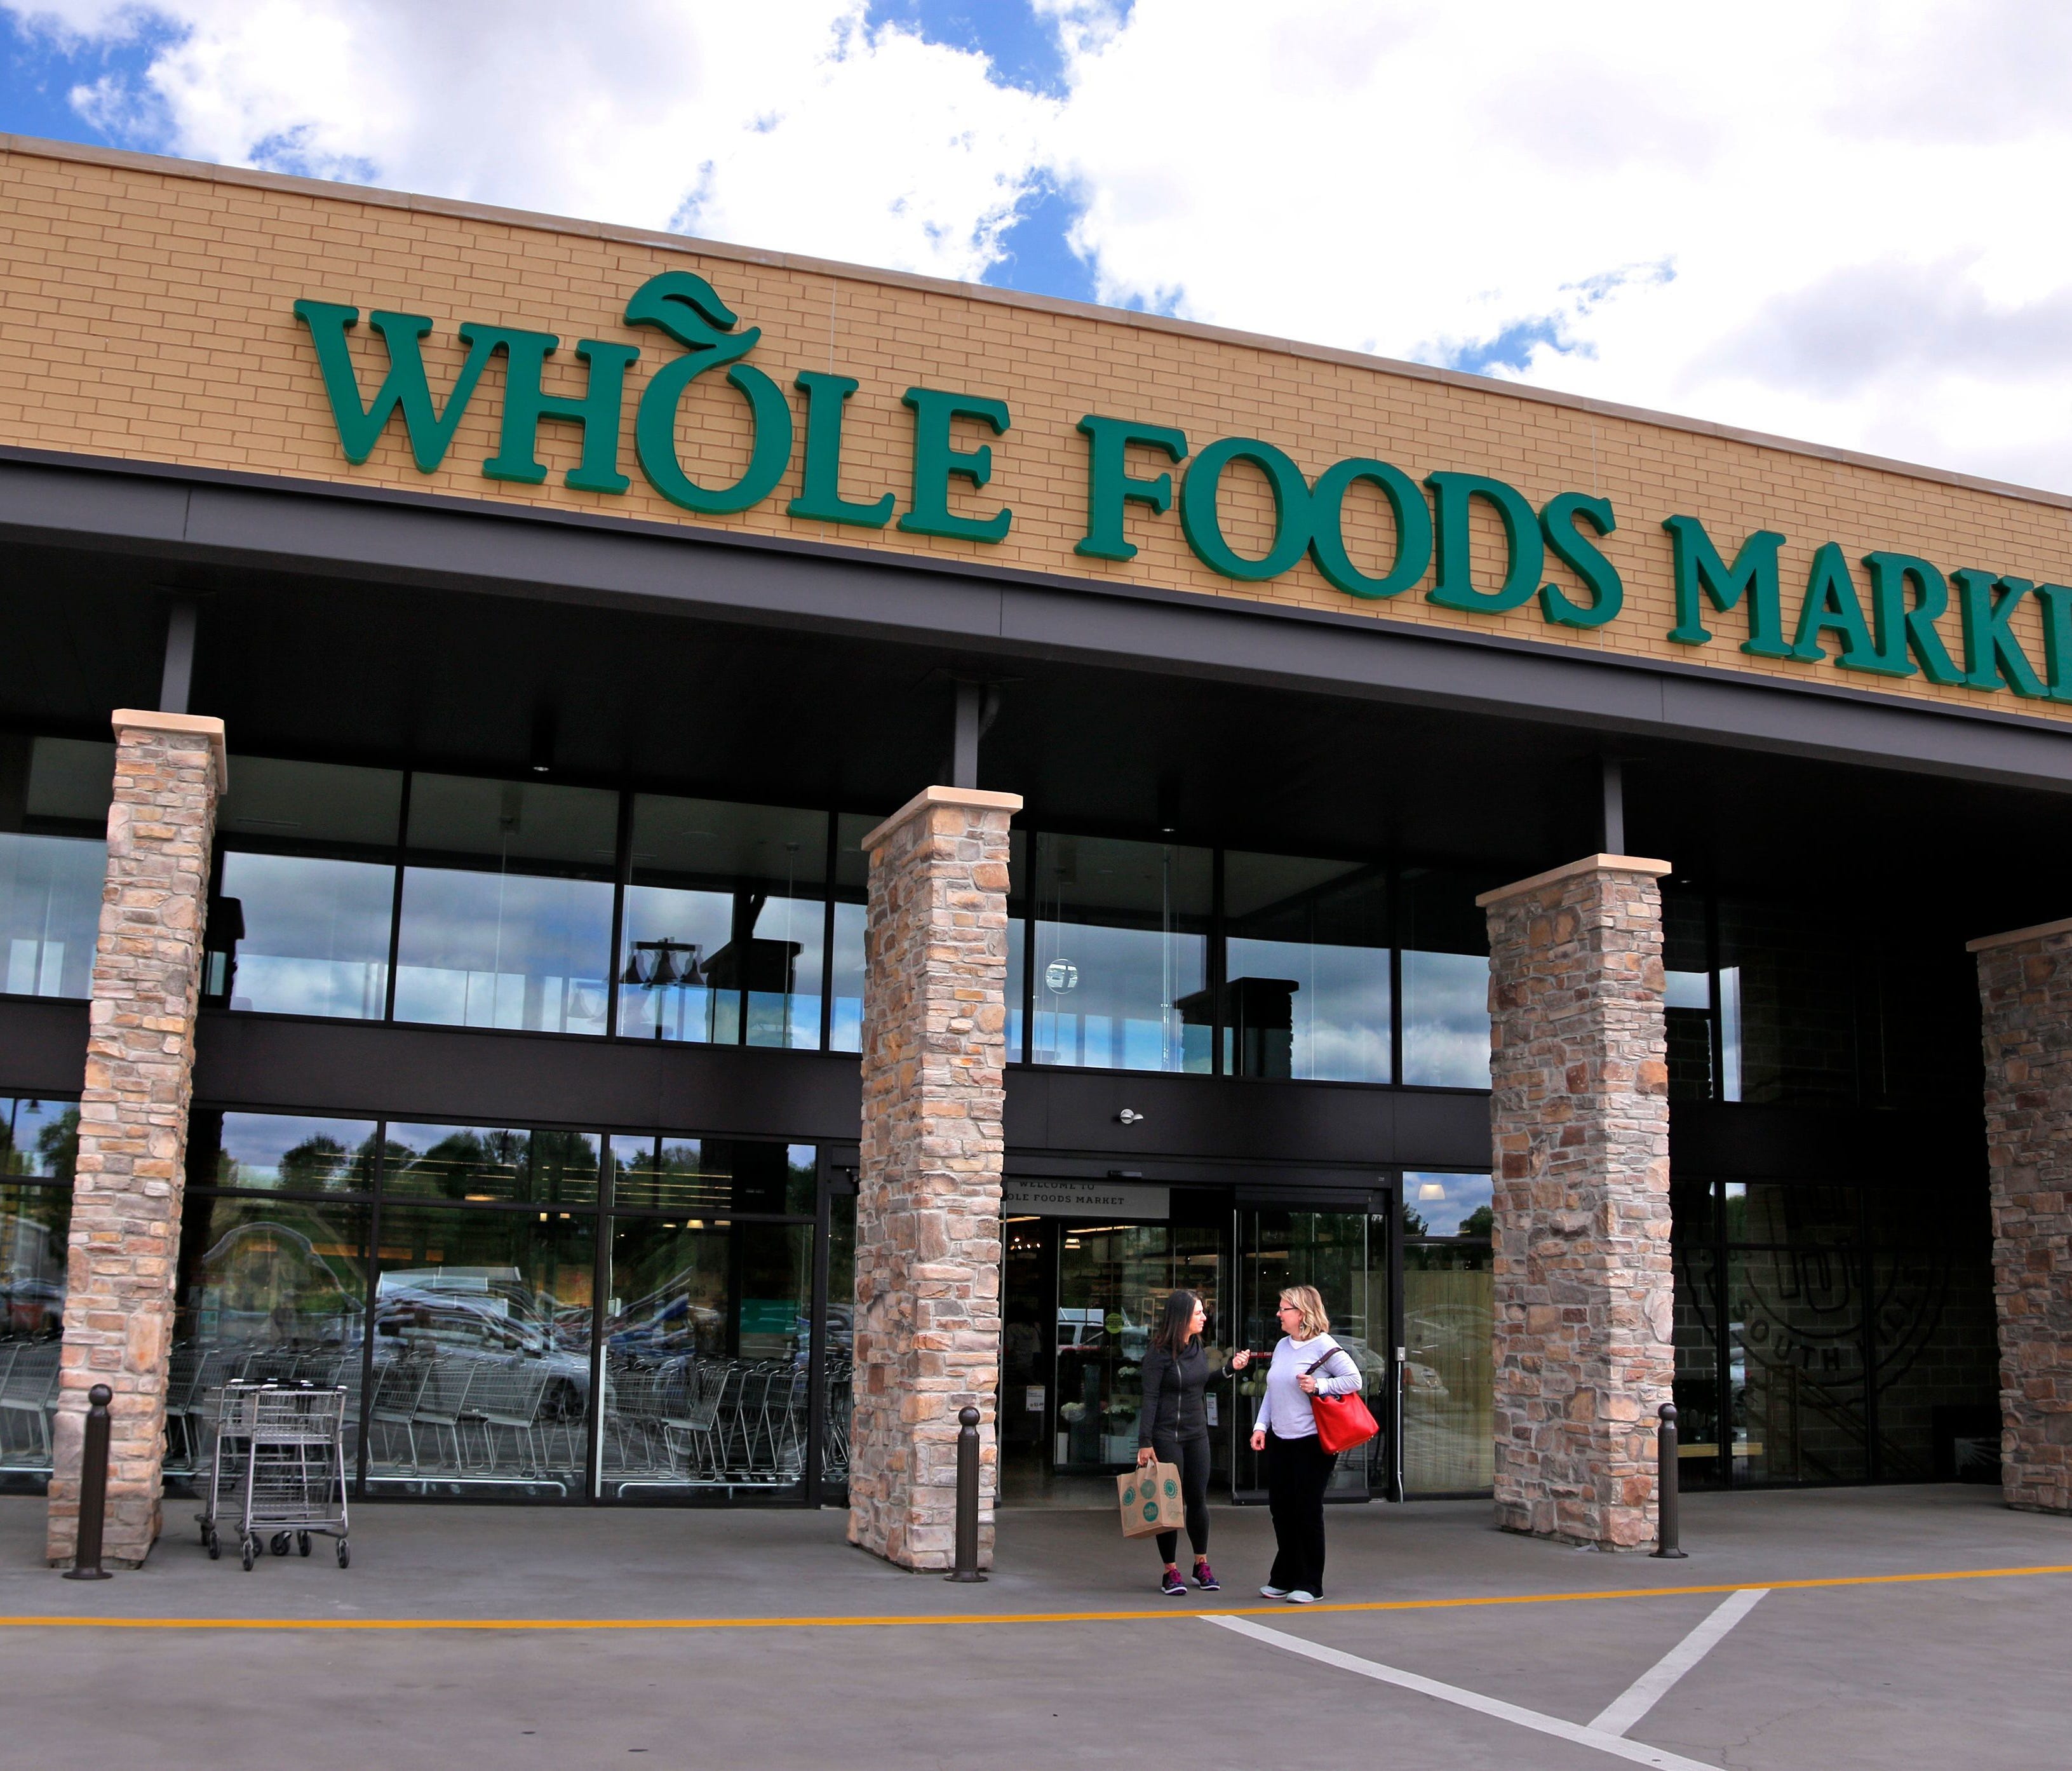 A congressman has called for a hearing to look into potential antitrust issues in the Amazon-Whole Foods deal.